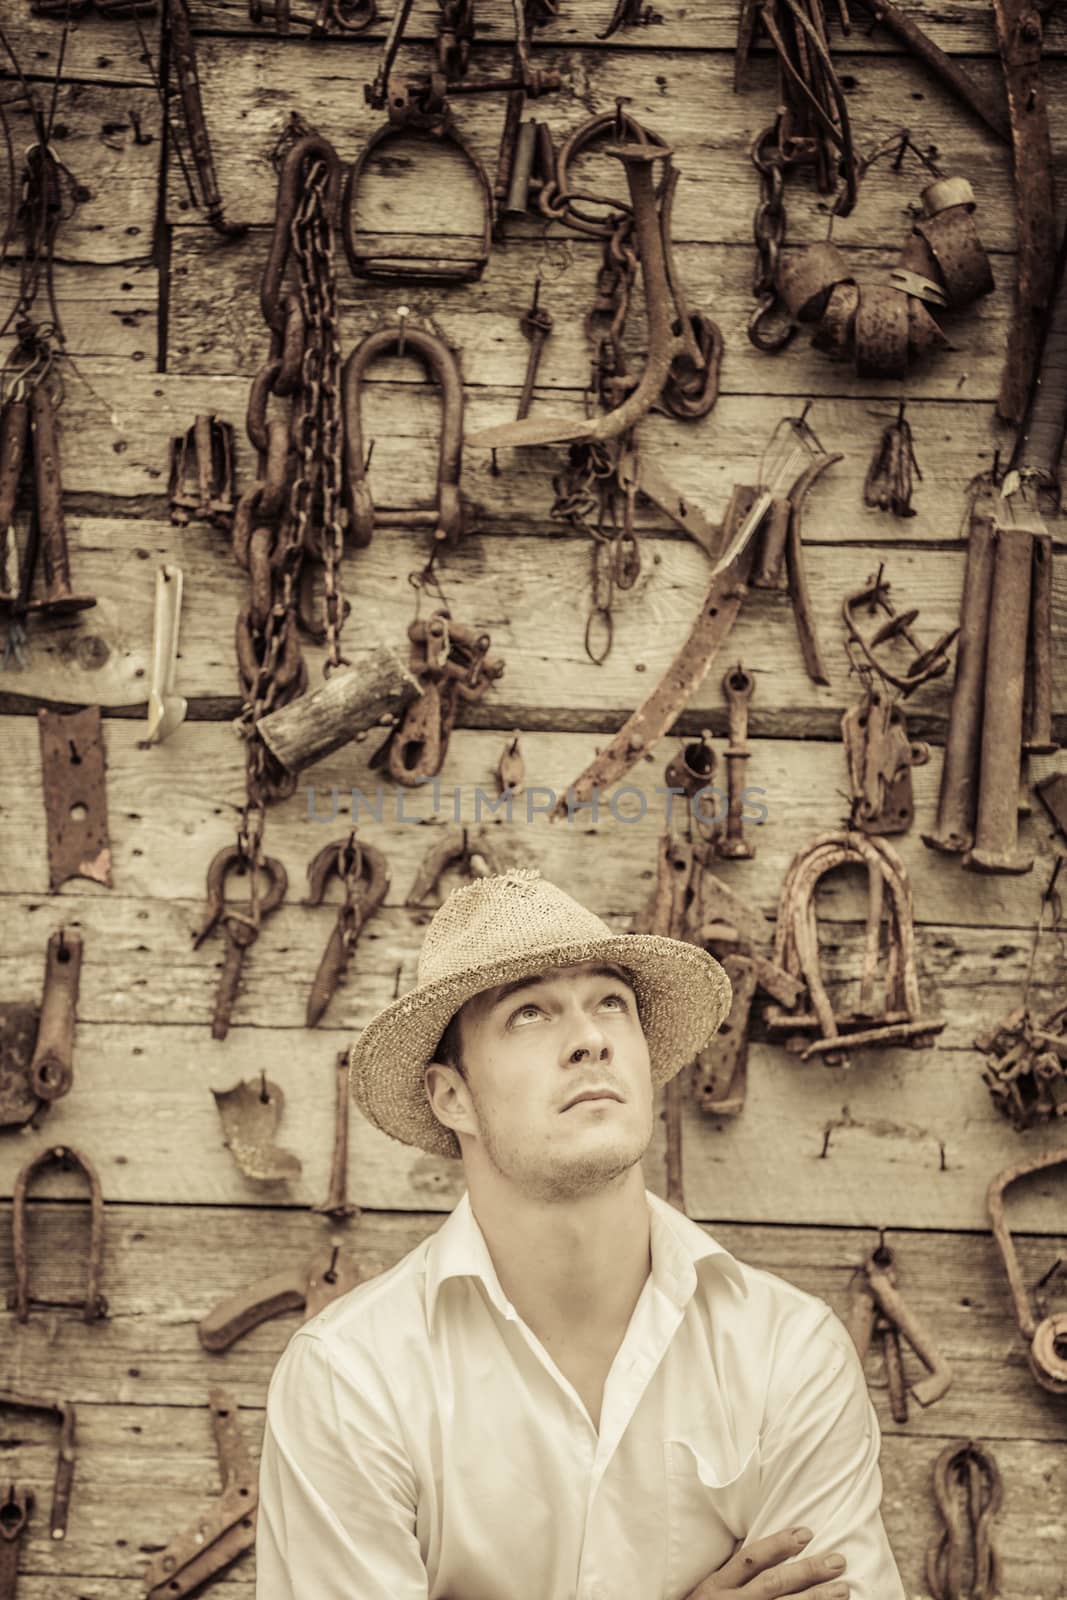 Farmer Portrait in front of a Wall Full with Old Rusty Tools